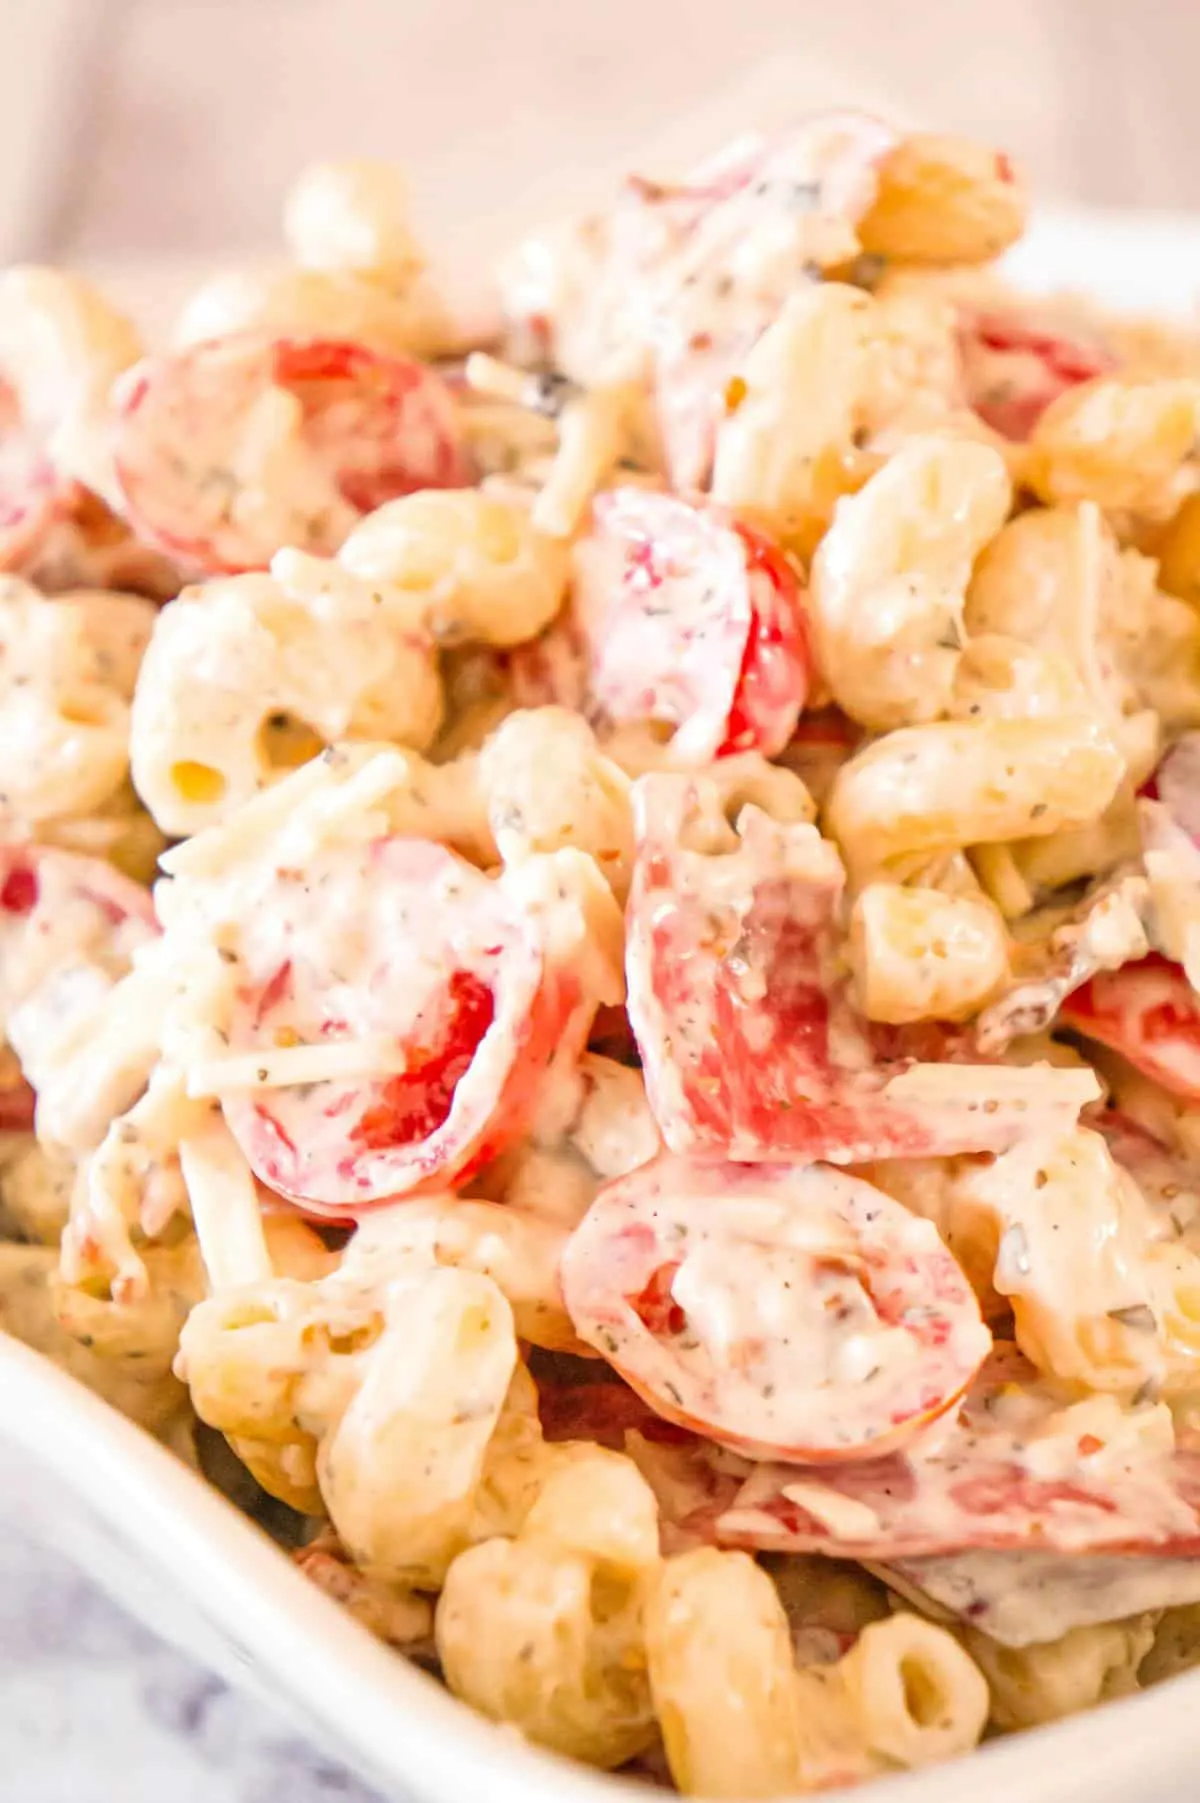 Italian Pasta Salad is a cold side dish recipe loaded with salami, chopped tomatoes, red onions, crumbled bacon, Parmesan cheese and mozzarella cheese all tossed in a creamy basil pesto dressing.